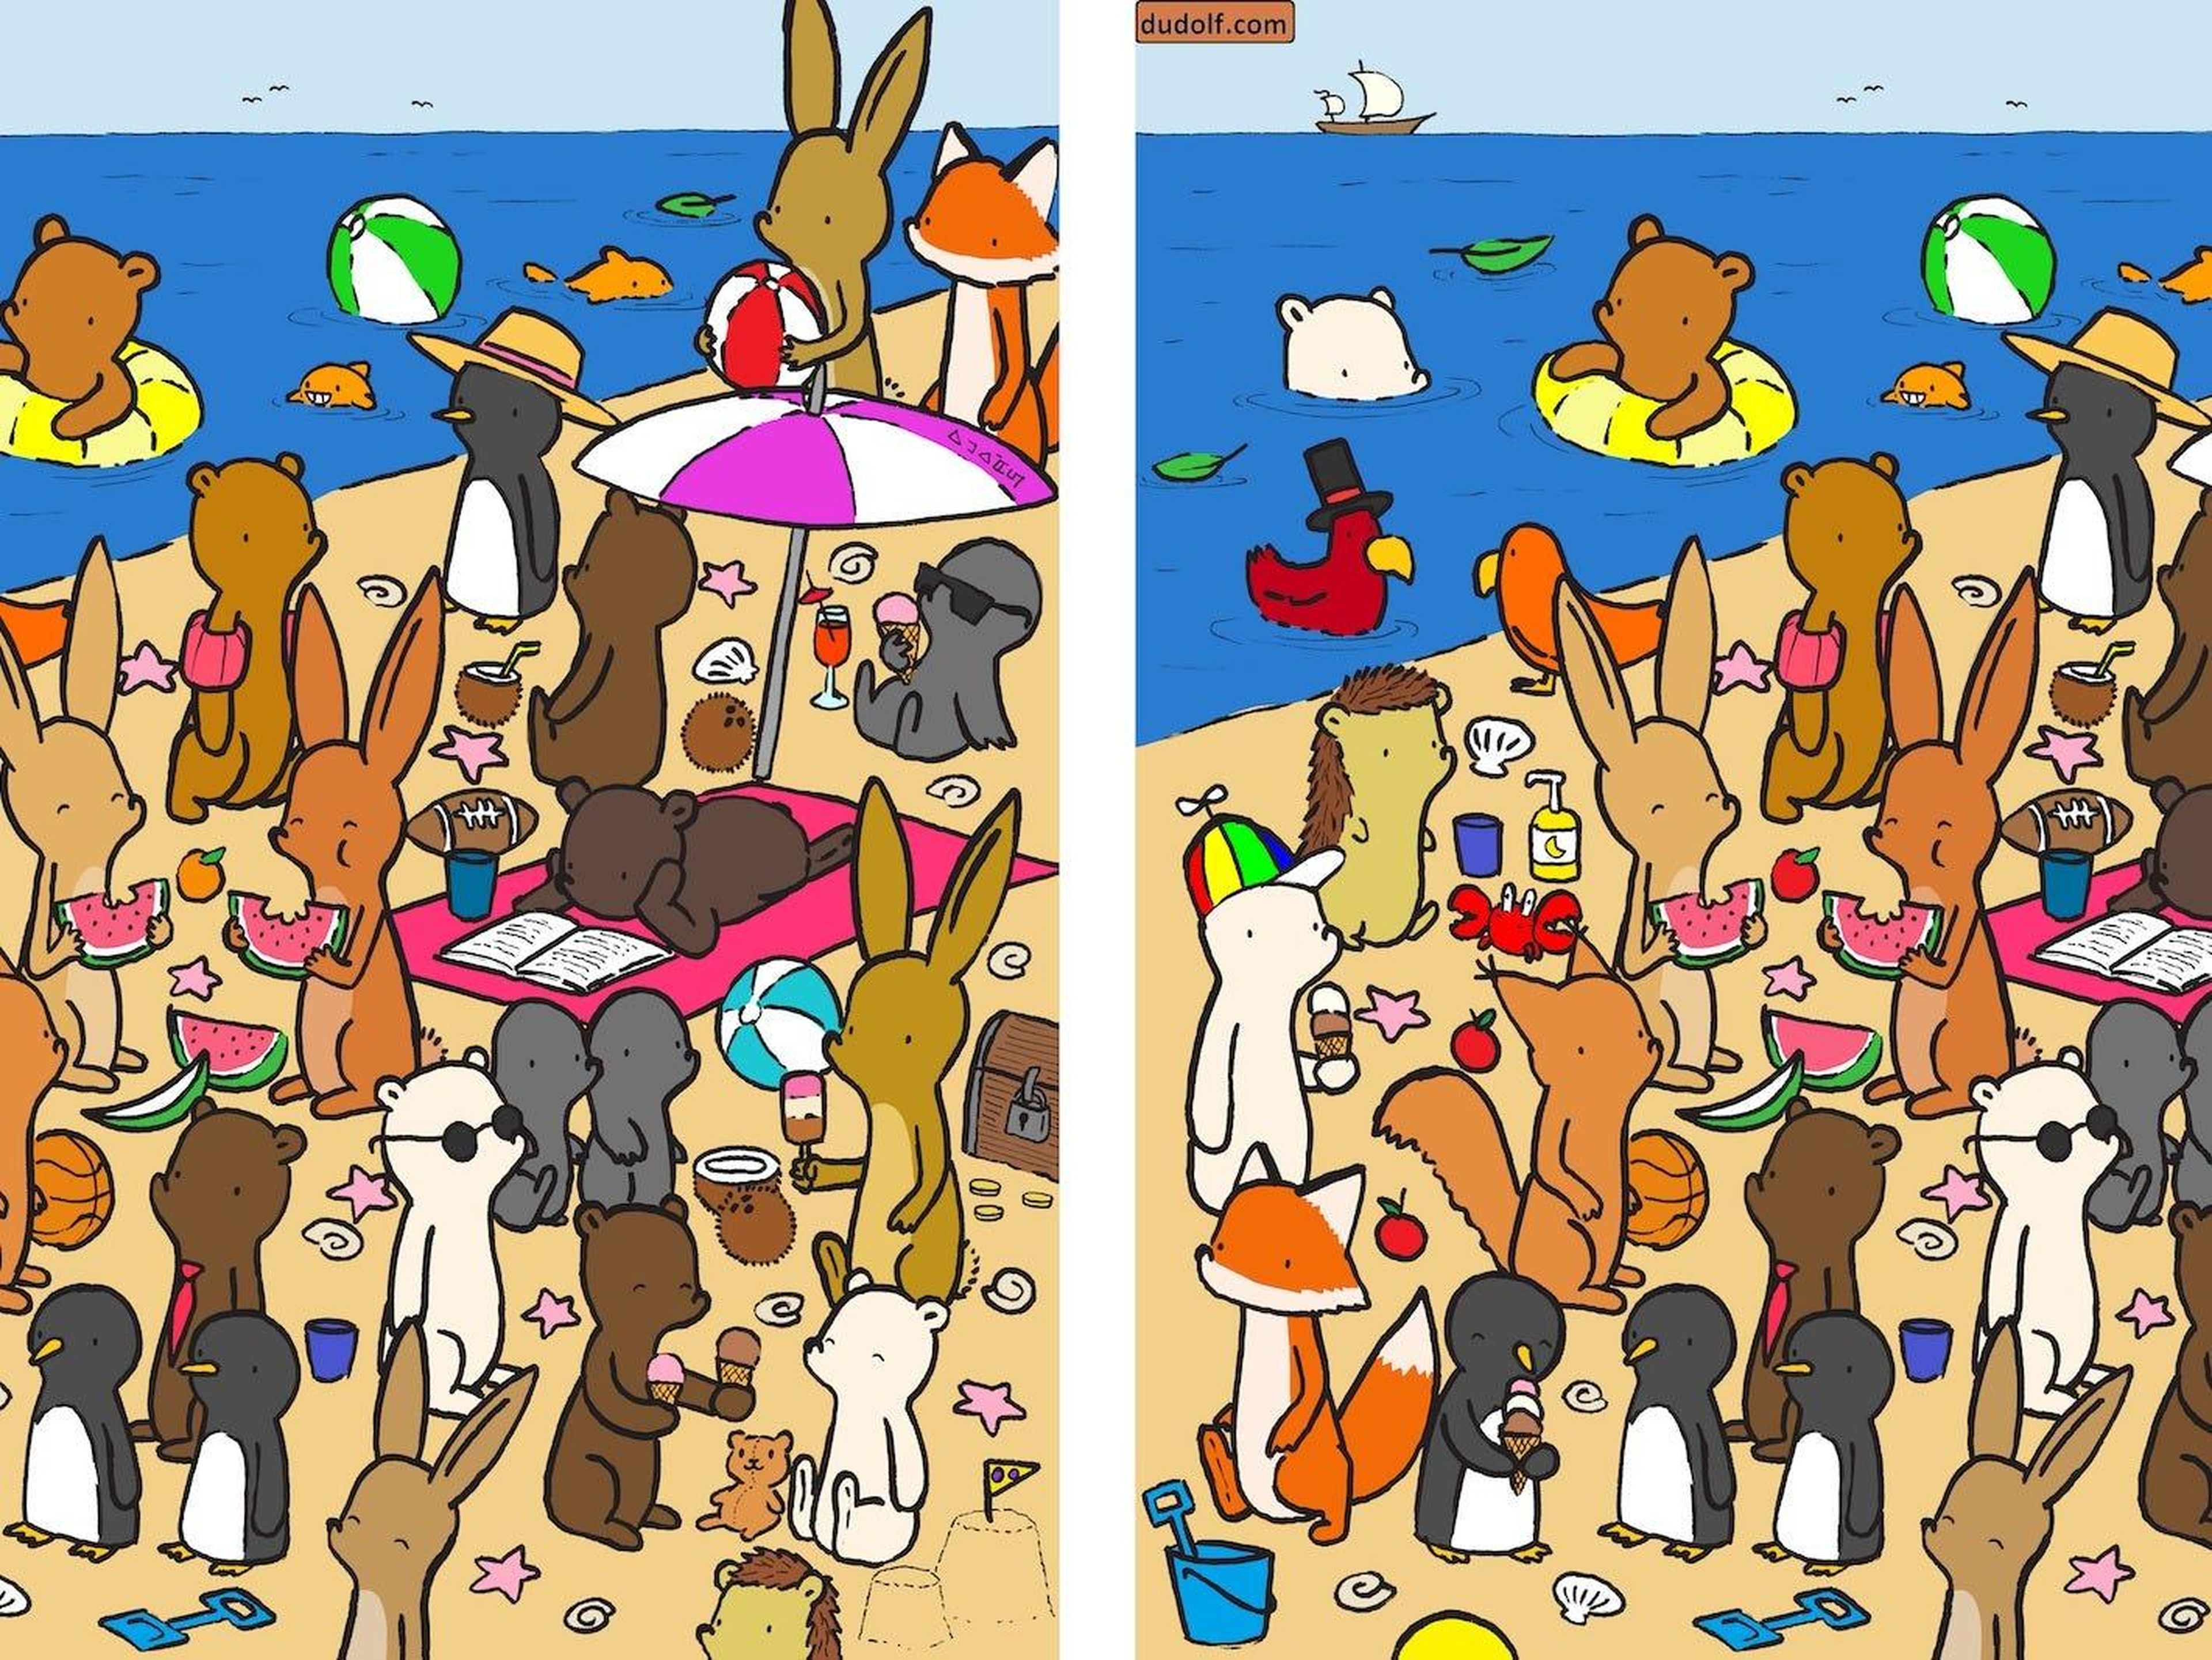 An artist sneaks hard-to-spot details into his brain-teasing illustrations. See if you can find the 7 differences between these beach party scenes.